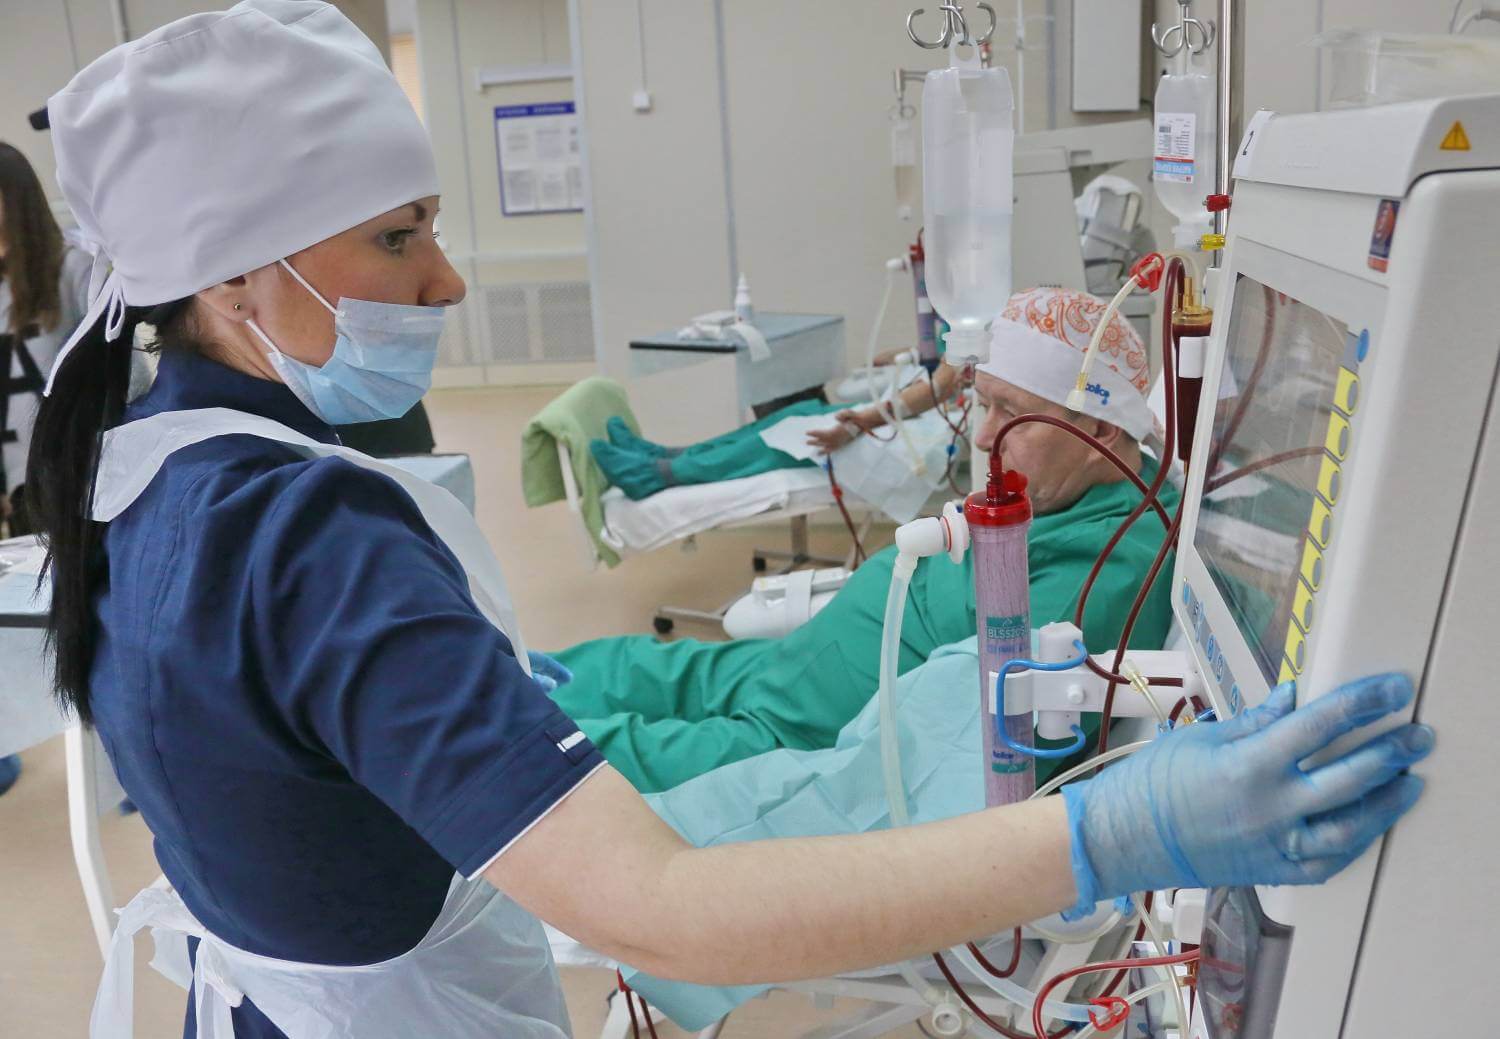 The hemodialysis center in Kyiv continues to work, but needs help